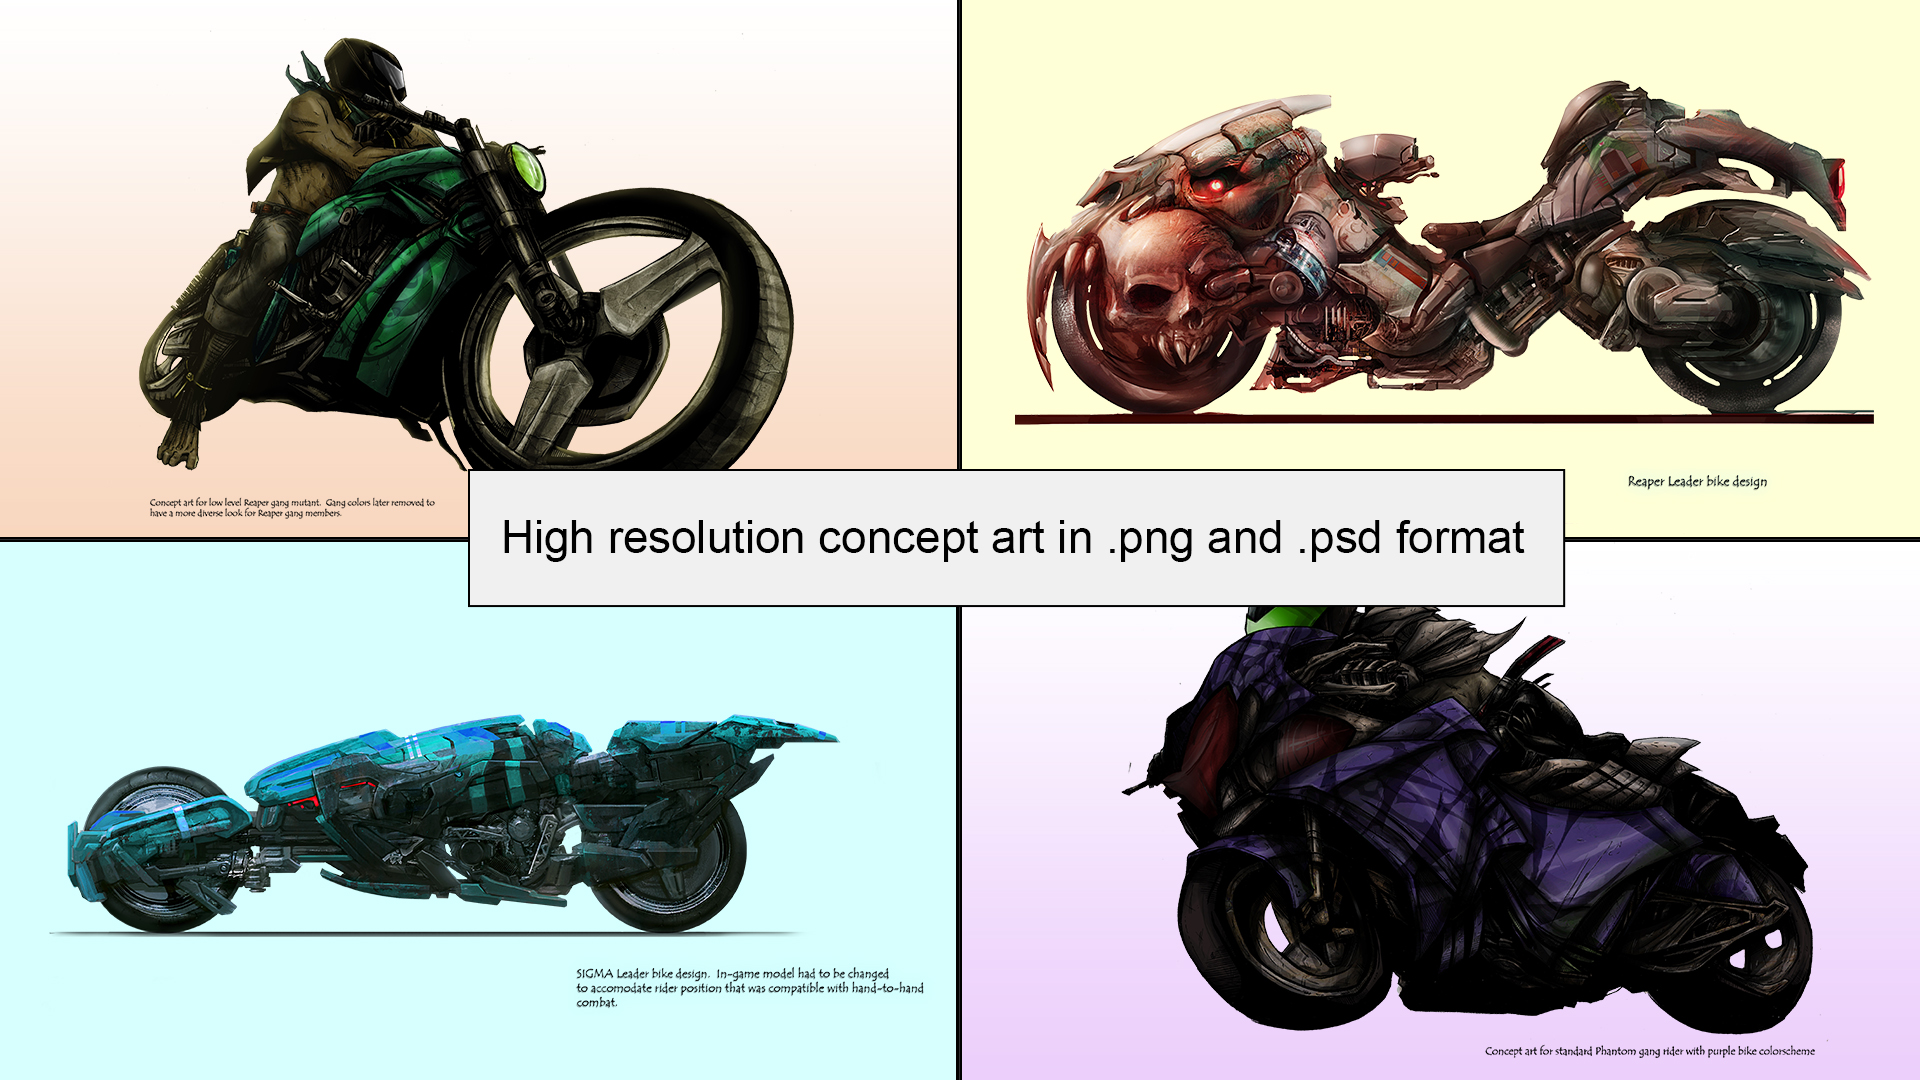 Road Redemption - Concept Art and Videos Featured Screenshot #1